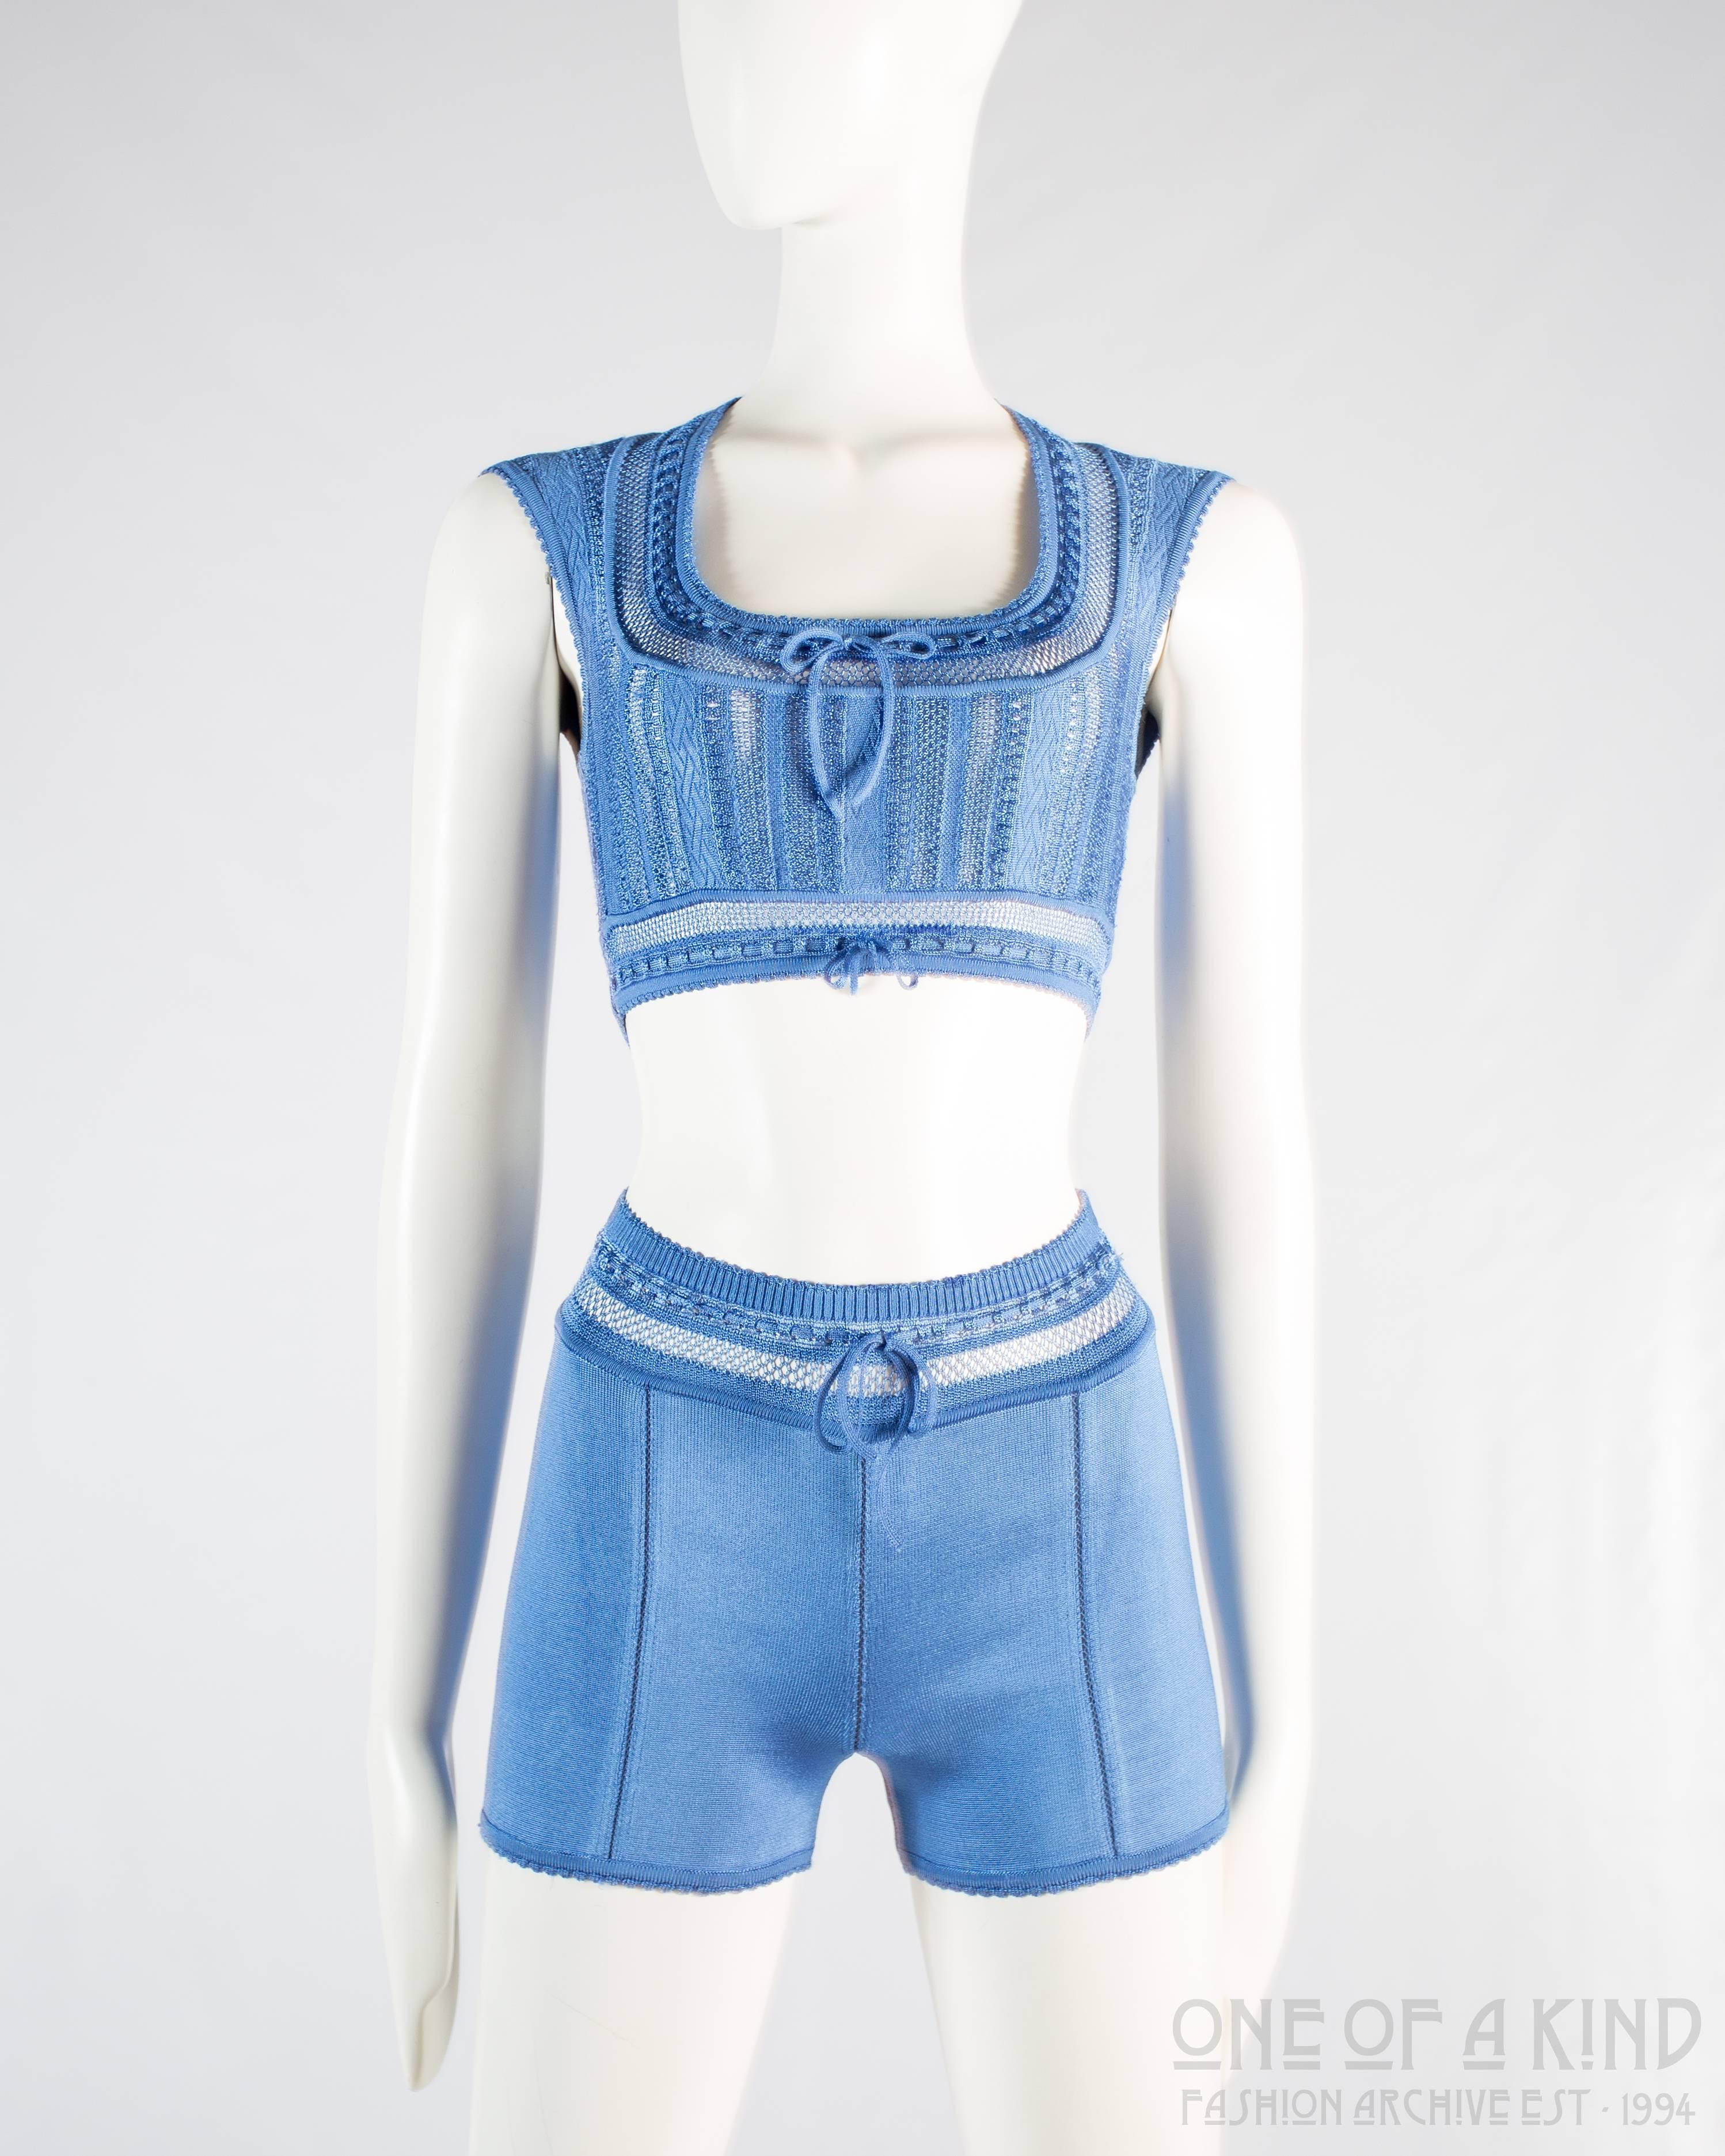 Azzedine Alaia blue acetate knitted high waisted shorts and bra top

Spring-Summer 1993